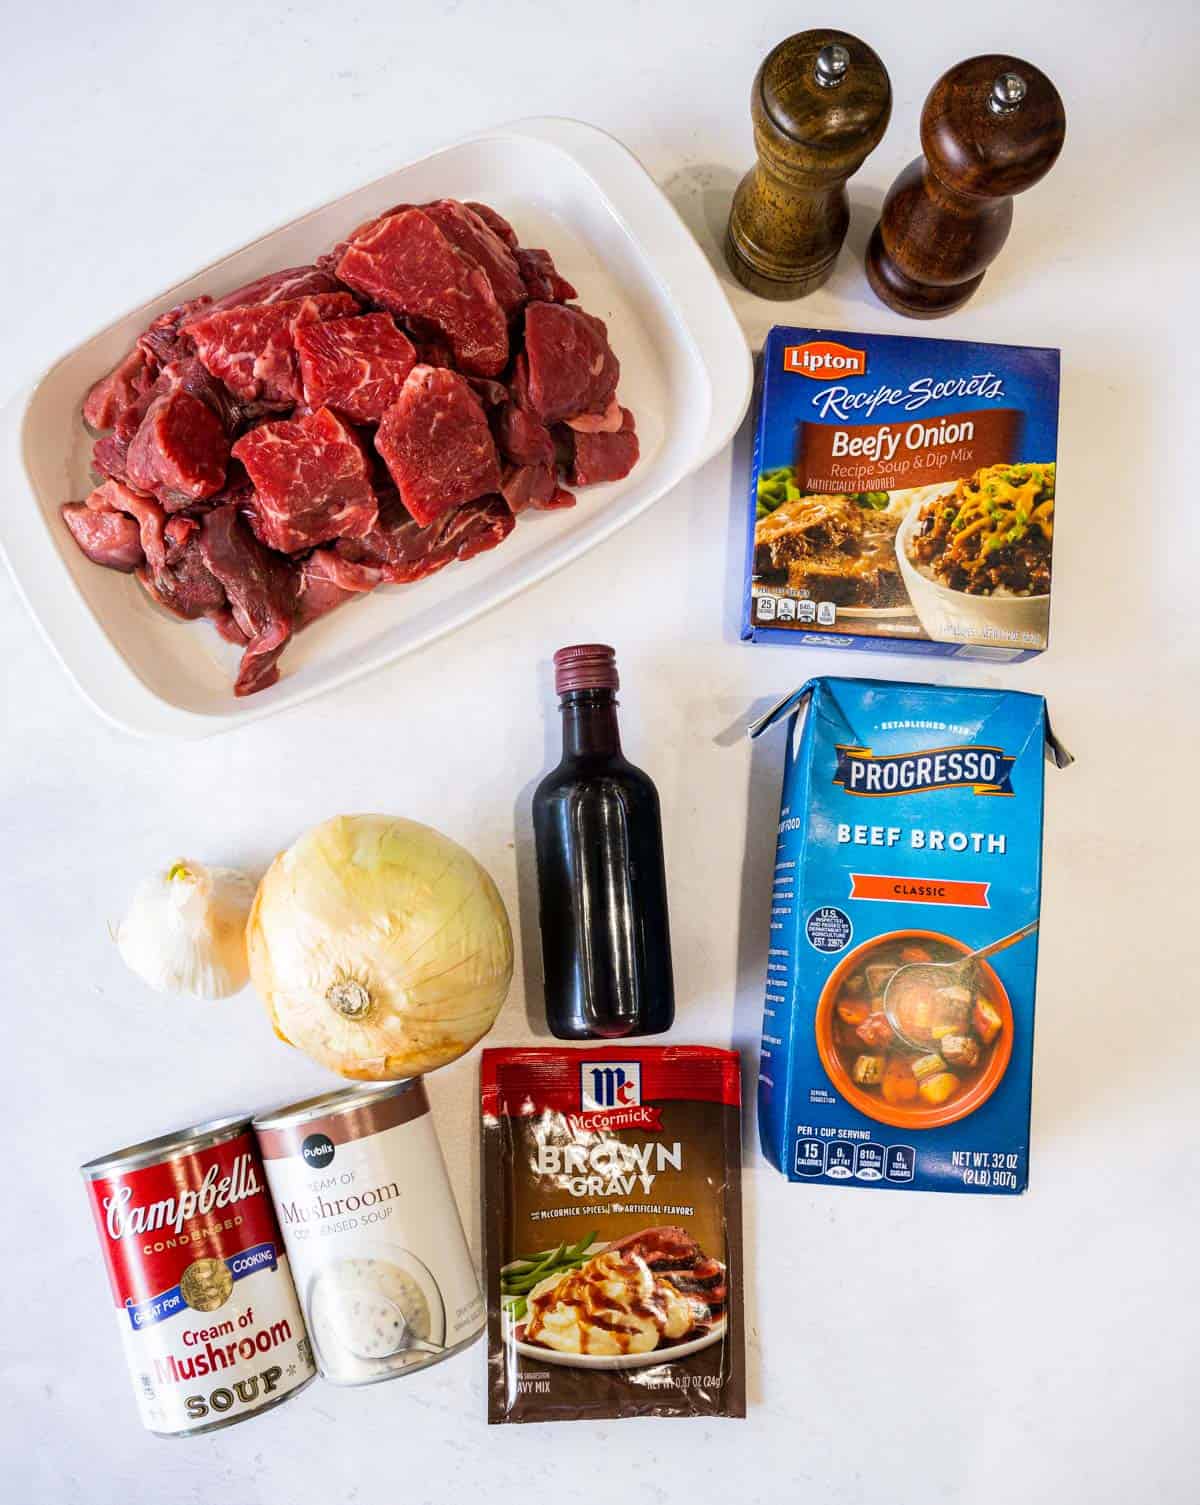 Image of ingredients to make beef tips and gravy.